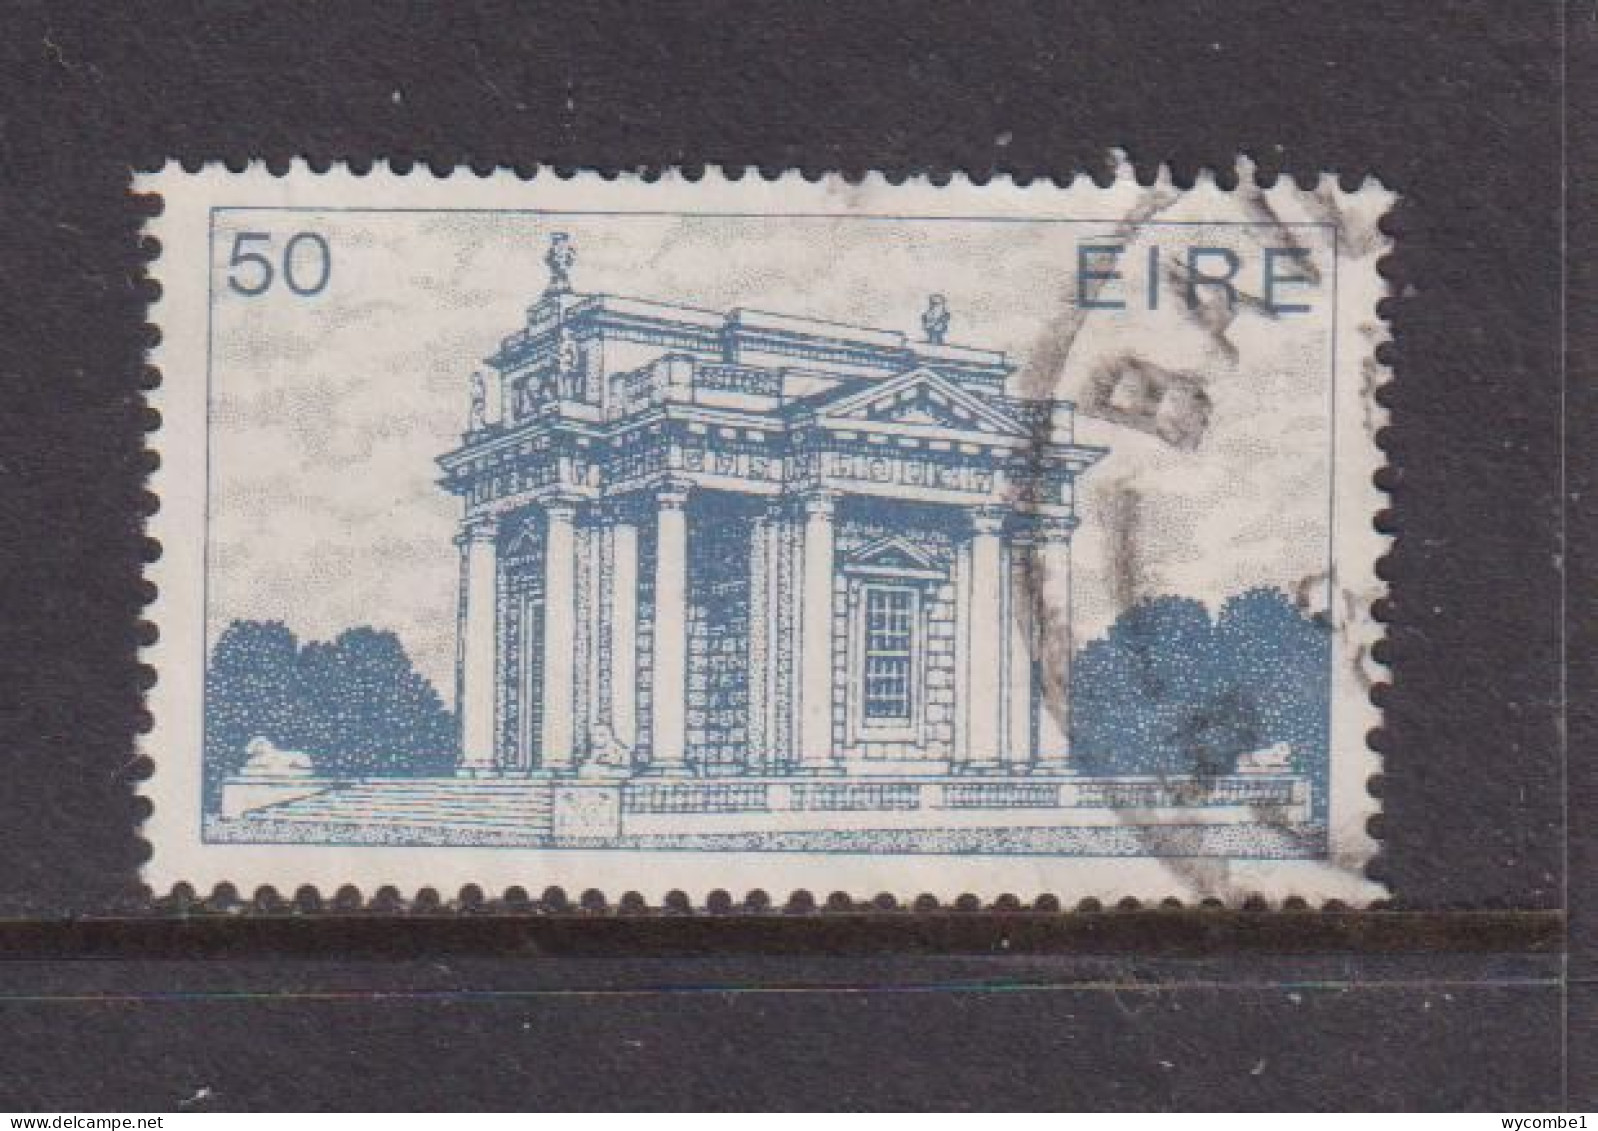 IRELAND  -  1983  Architecture Definitives  50p  Used As Scan - Used Stamps